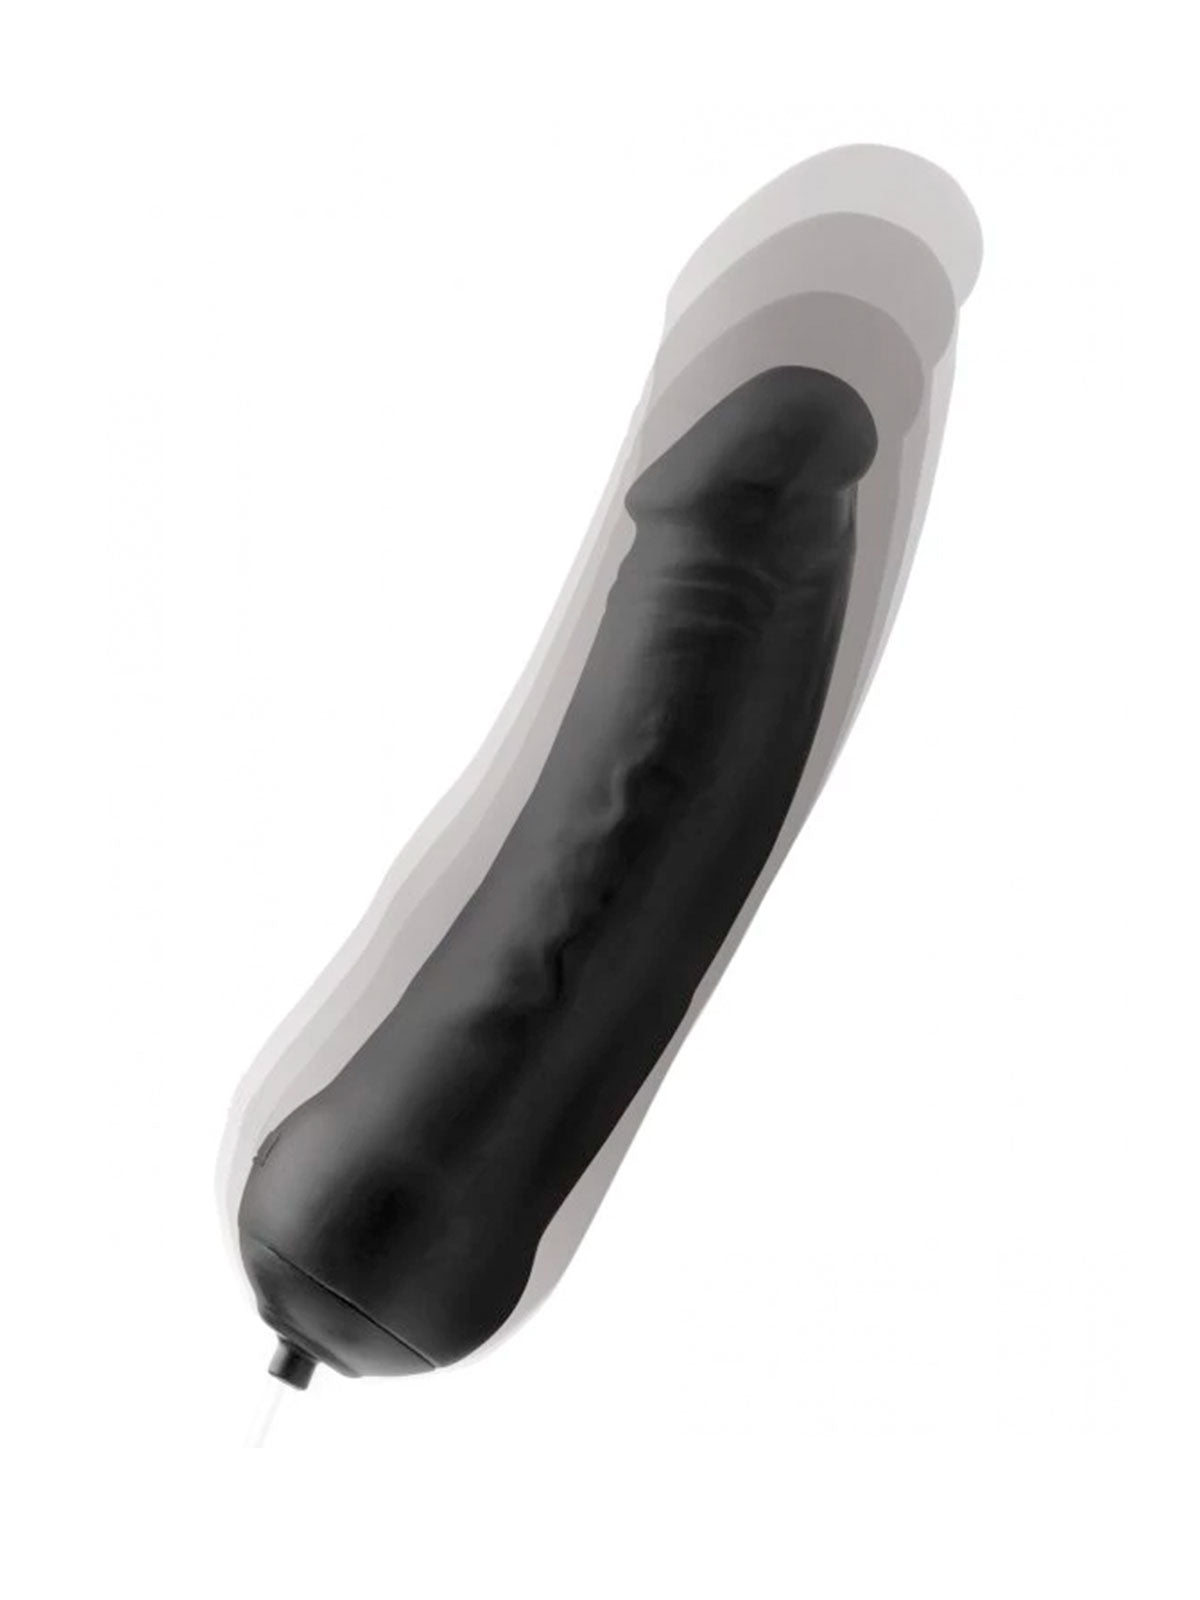 Inflatable Silicone Dildo